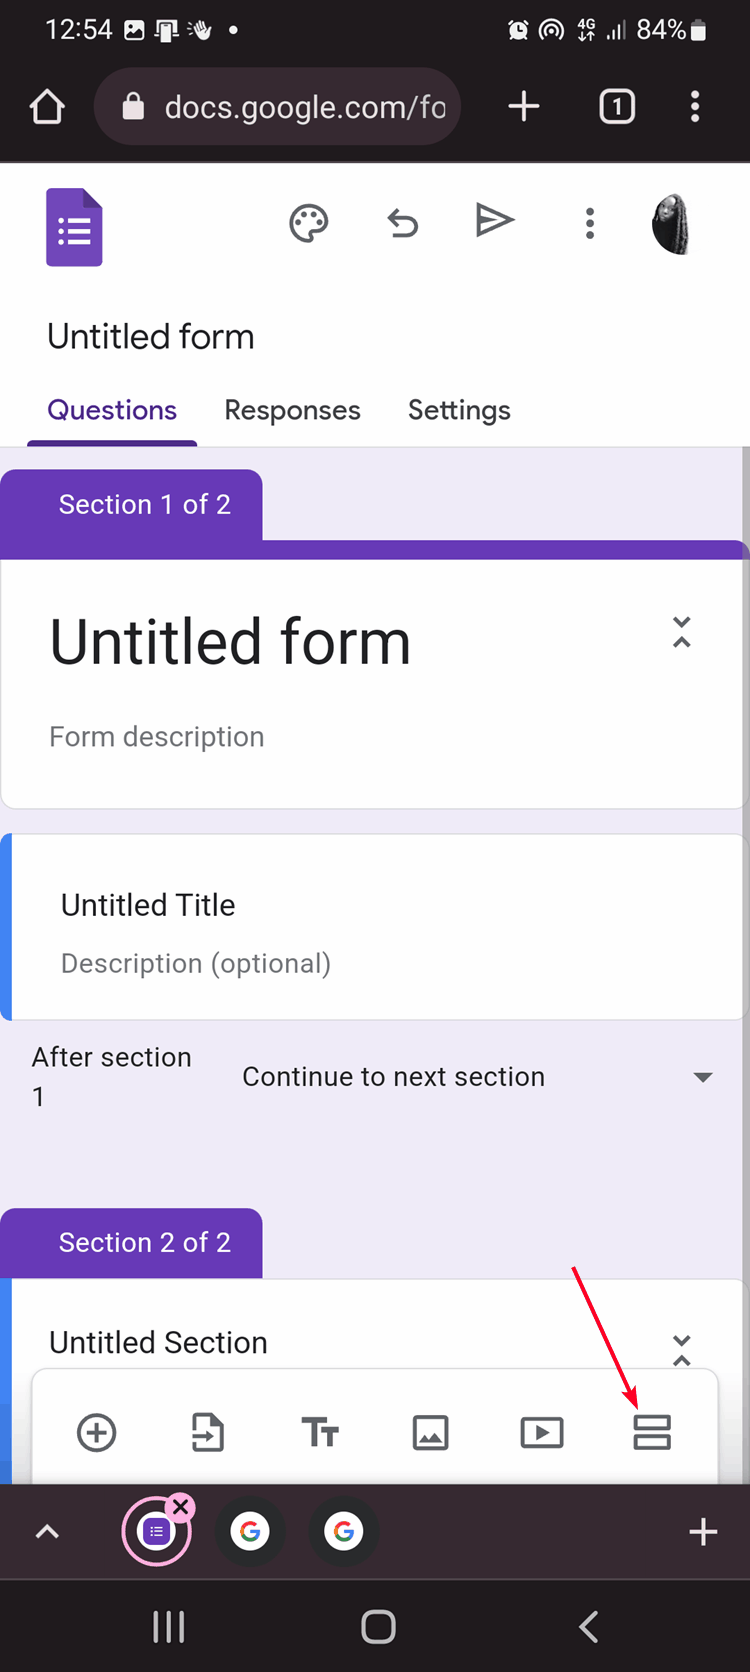 Icon for adding sections to Google Forms on mobile phone